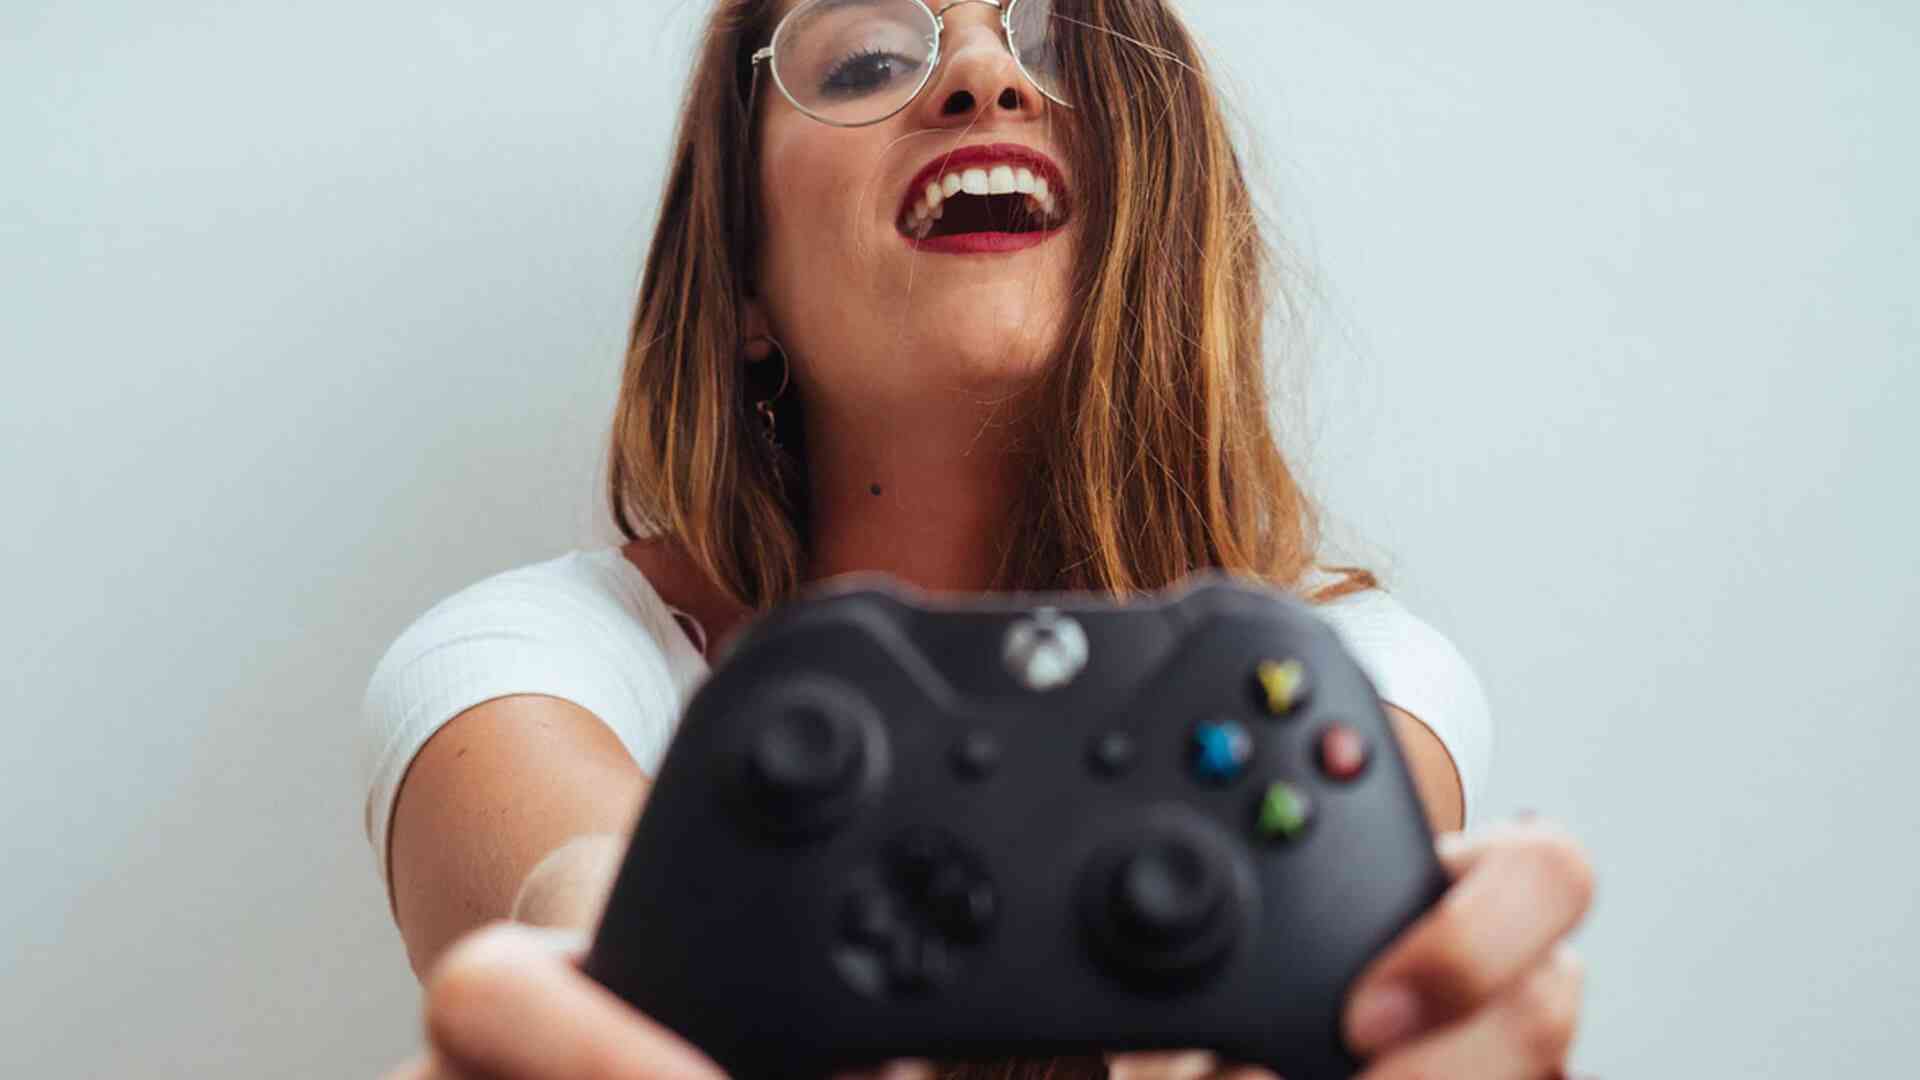 geek girl gamers are more likely to study science and technology degrees big 1